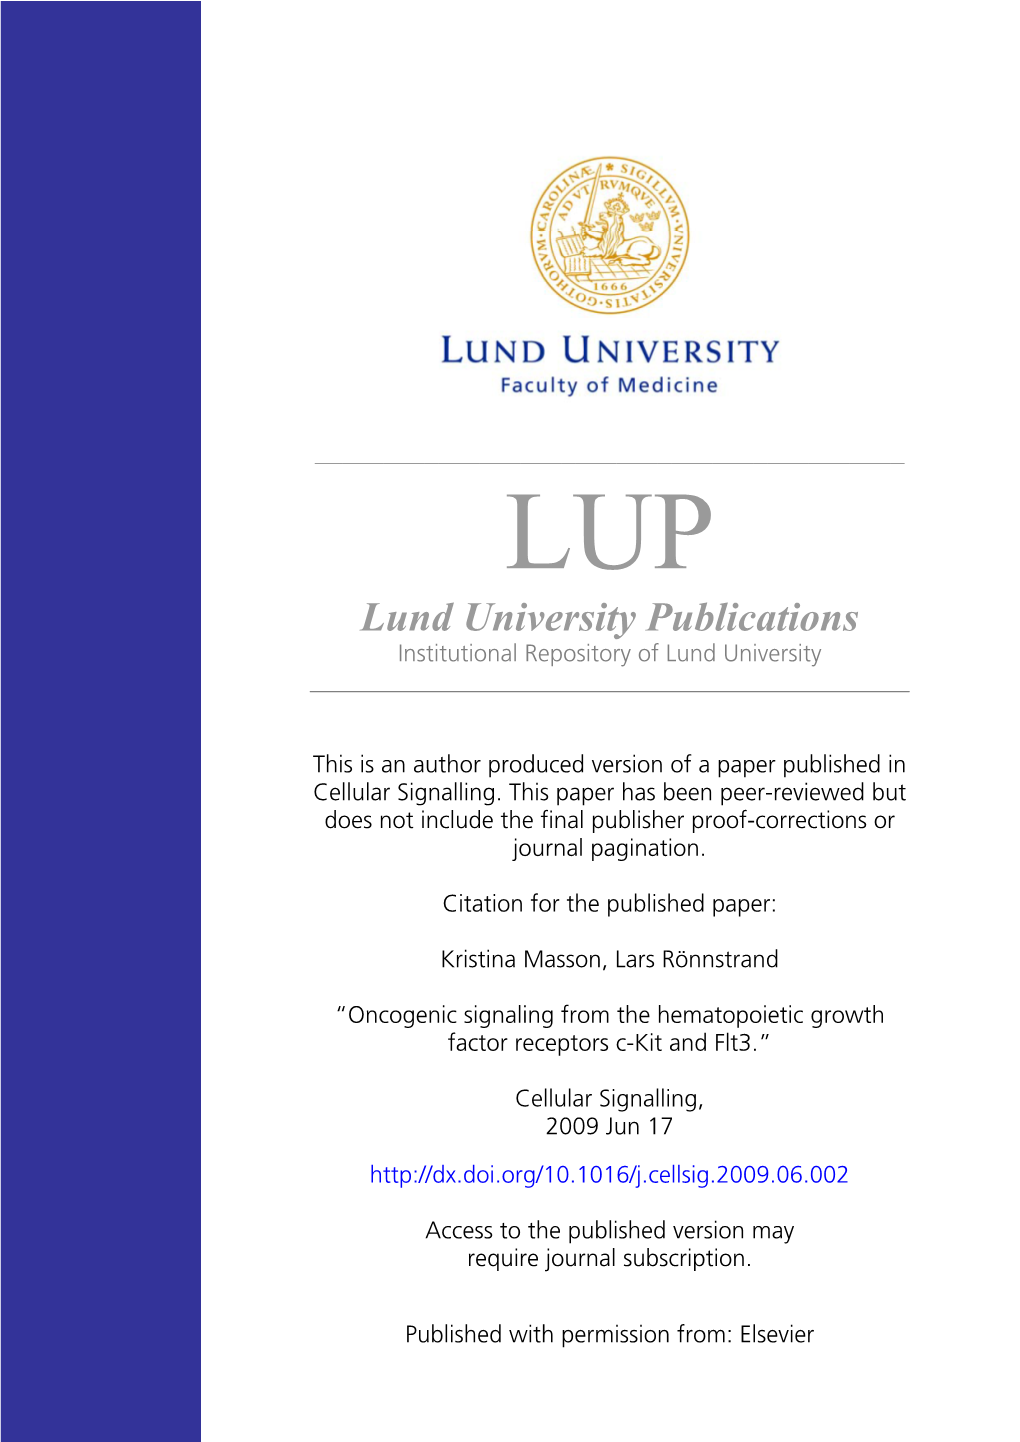 Lund University Publications Institutional Repository of Lund University ______